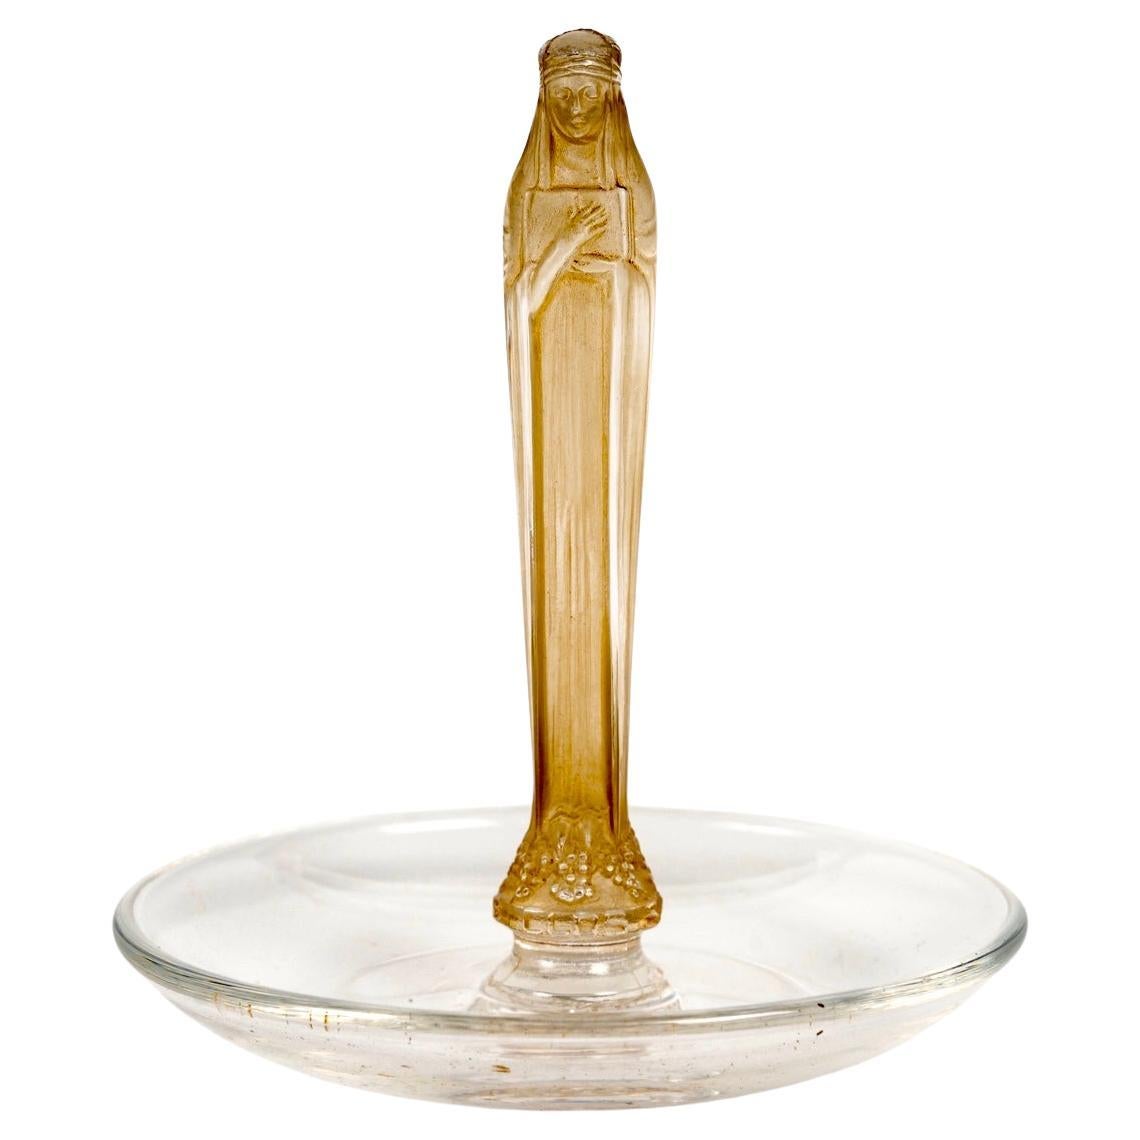 1925 René Lalique Asthray Pintray Clos Sainte Odile Glass with Sepia Patina For Sale